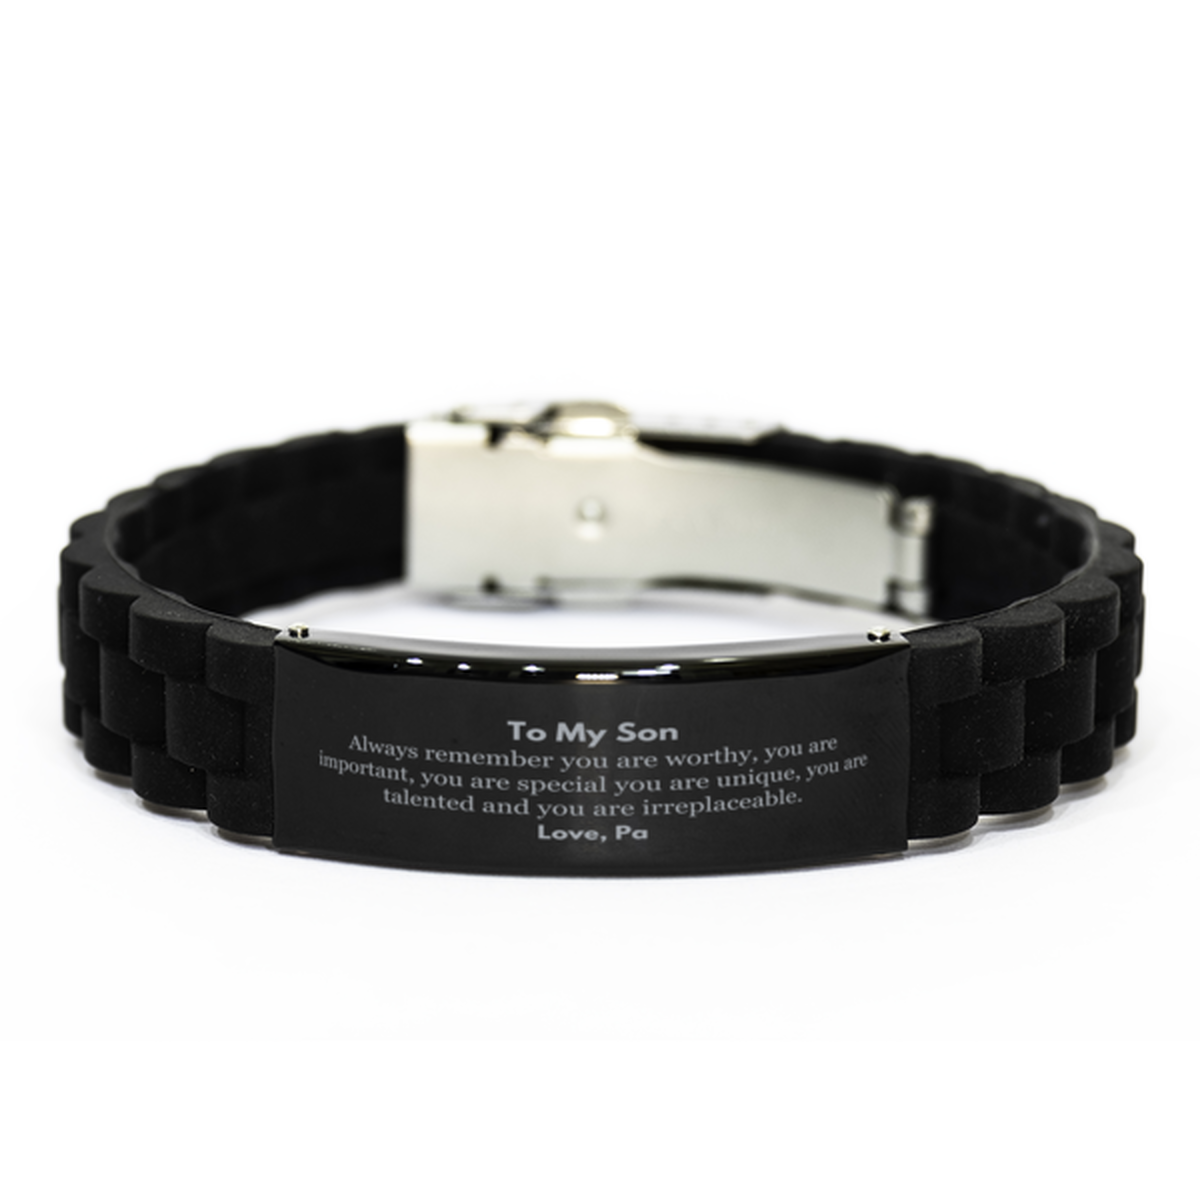 Son Birthday Gifts from Pa, Inspirational Black Glidelock Clasp Bracelet for Son Christmas Graduation Gifts for Son Always remember you are worthy, you are important. Love, Pa